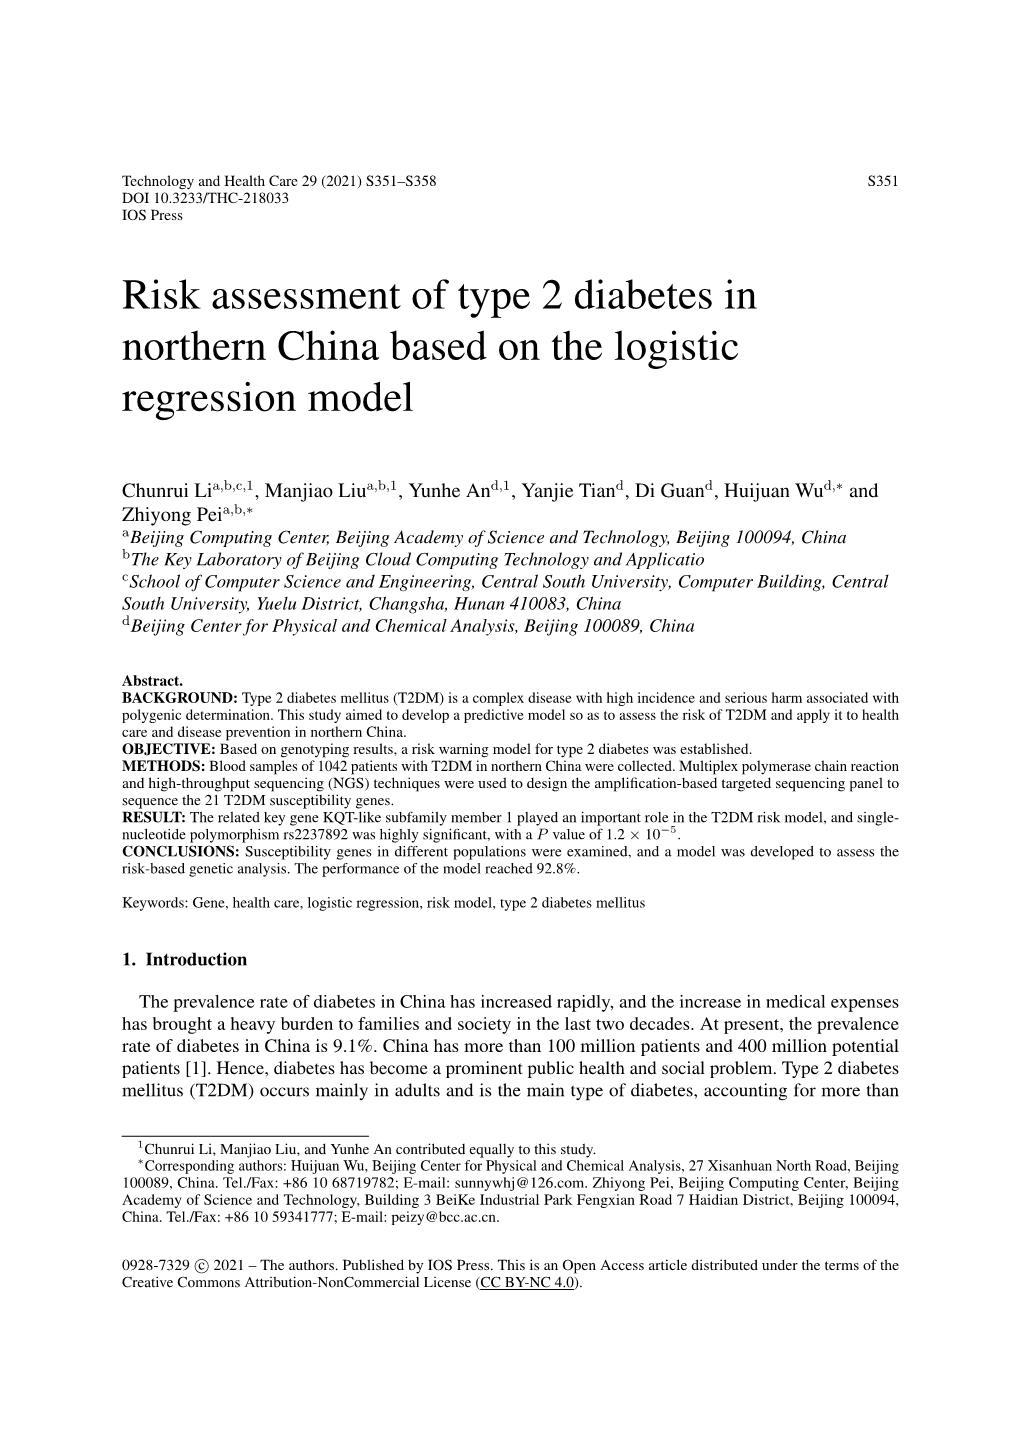 Risk Assessment of Type 2 Diabetes in Northern China Based on the Logistic Regression Model